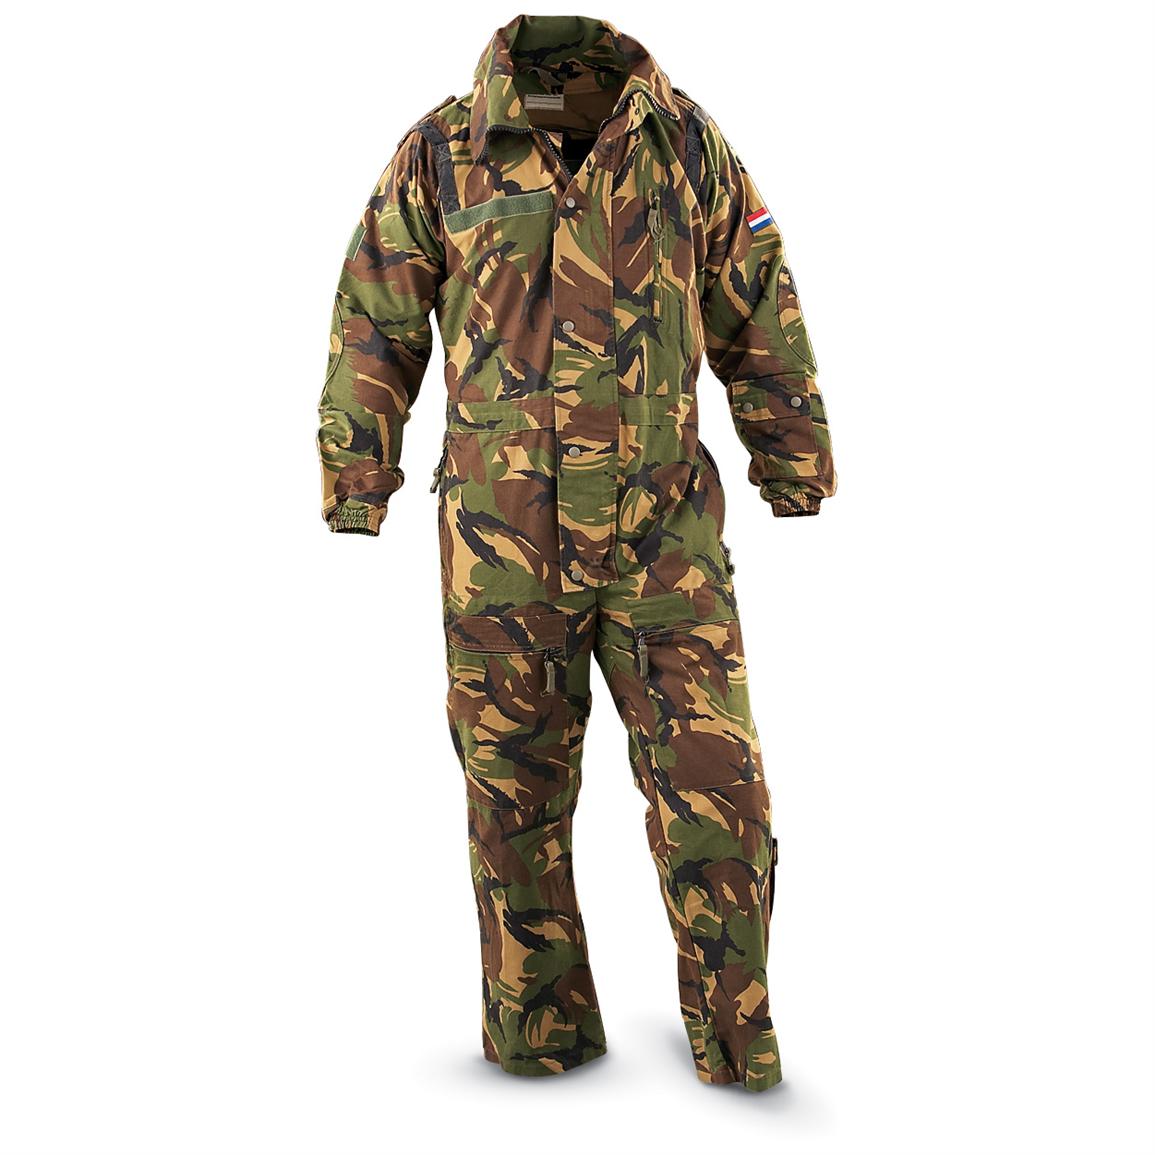 Used Dutch Military Tanker Coveralls, Camo Pattern - 130240, Overall ...